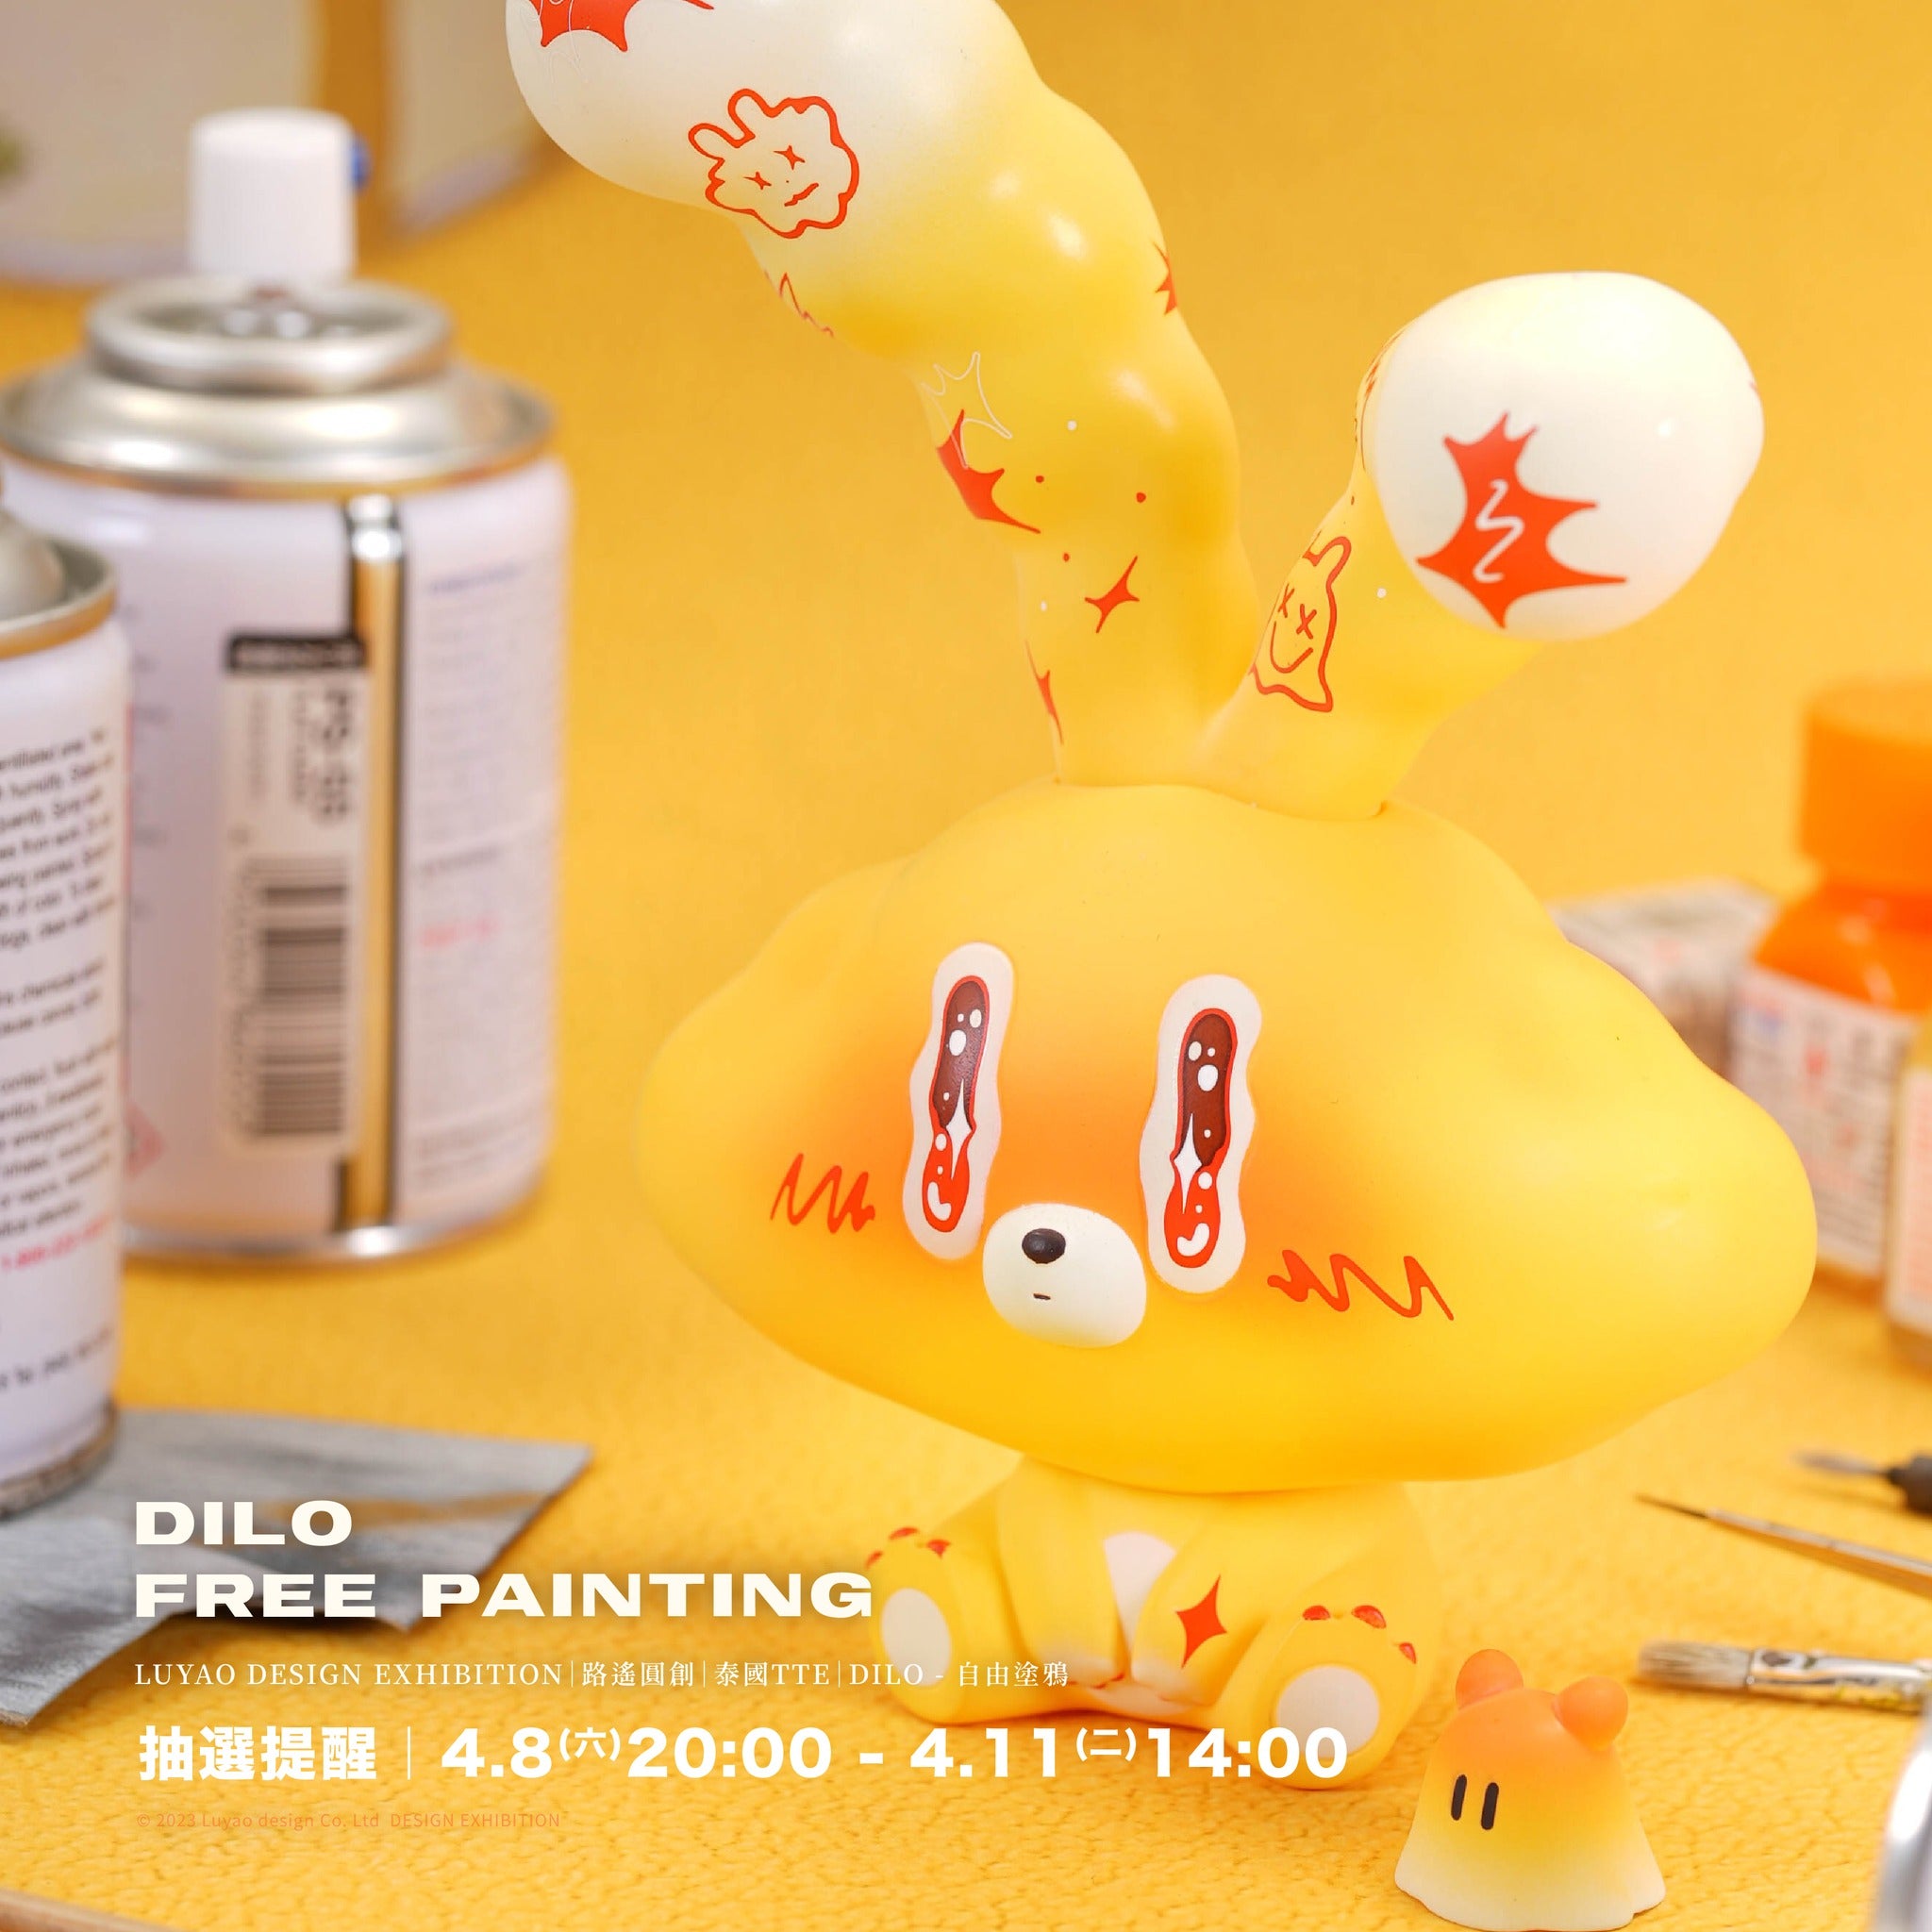 DILO-Free Painting